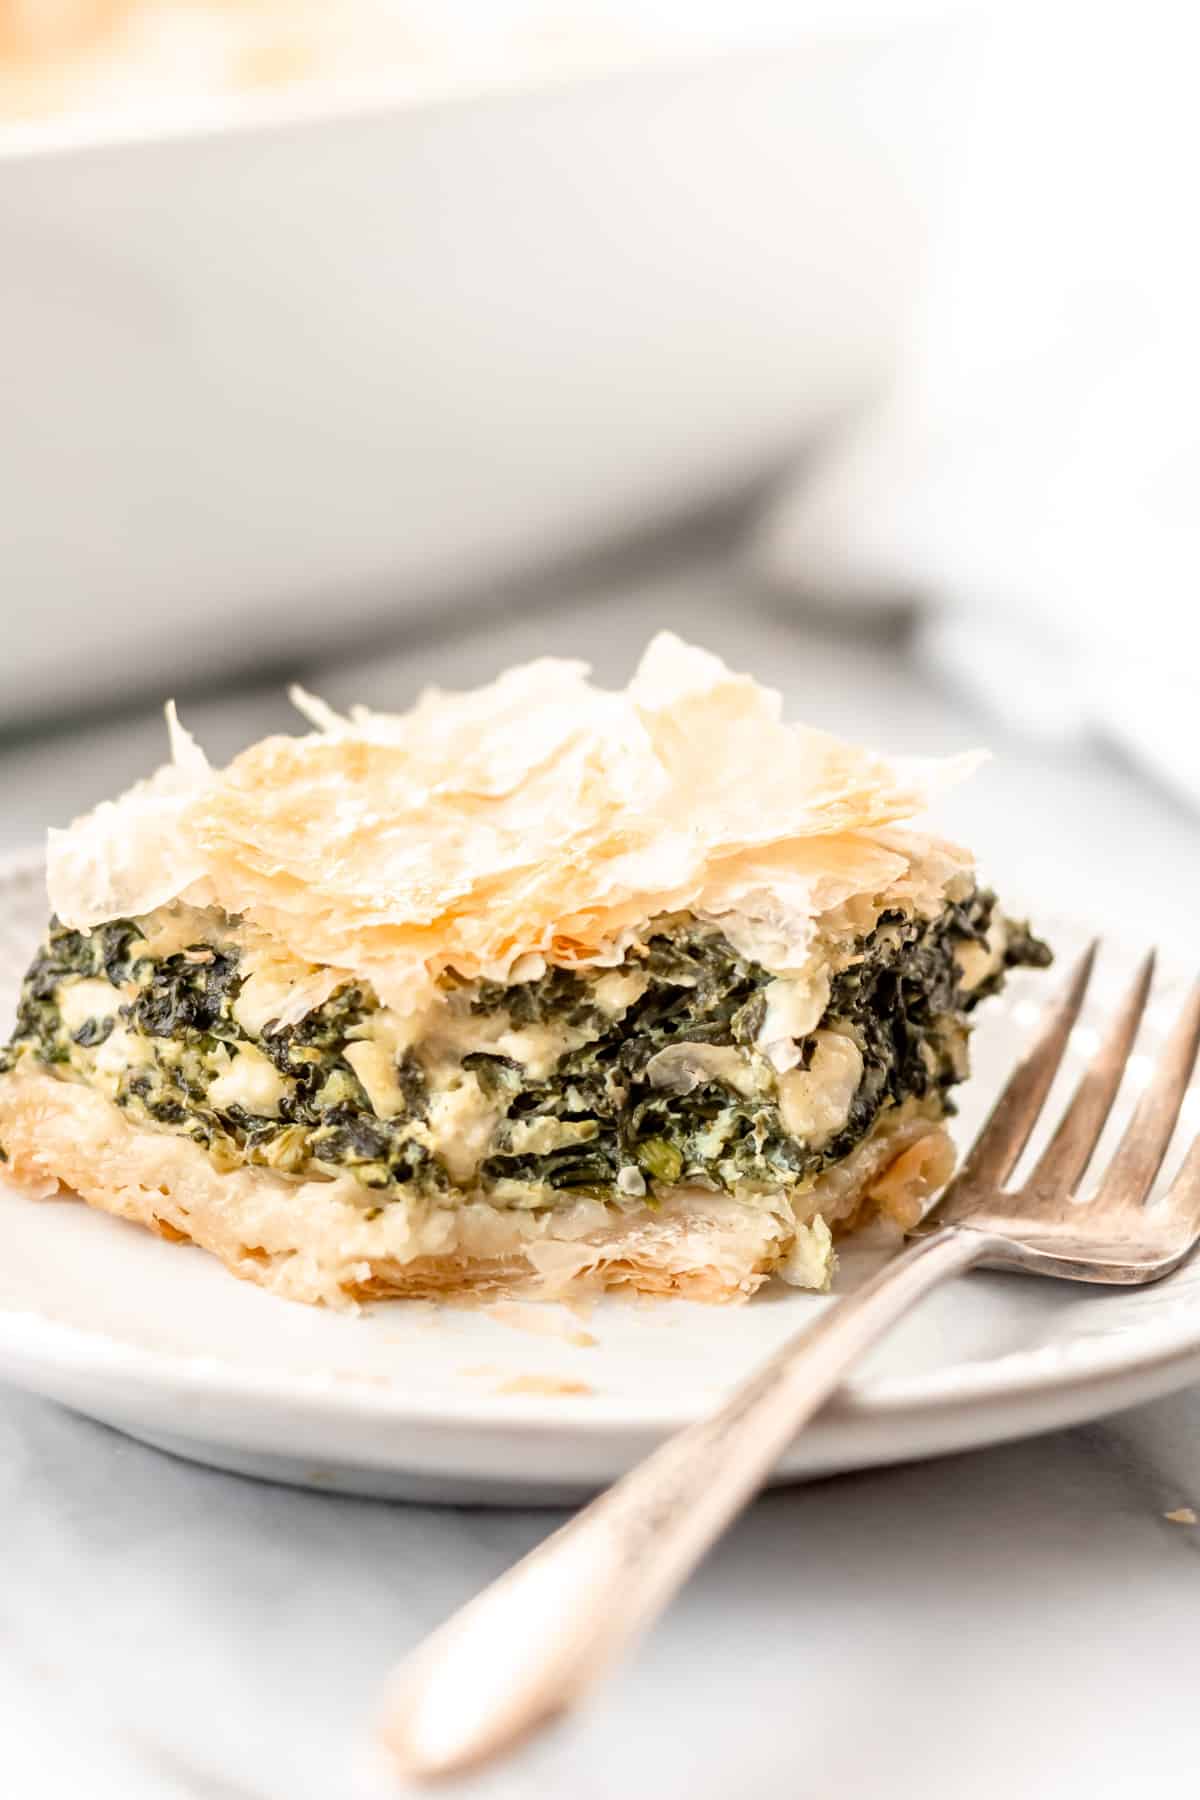 A serving of spanakopita on a white plate with a fork and a white casserole dish partially showing in the background.